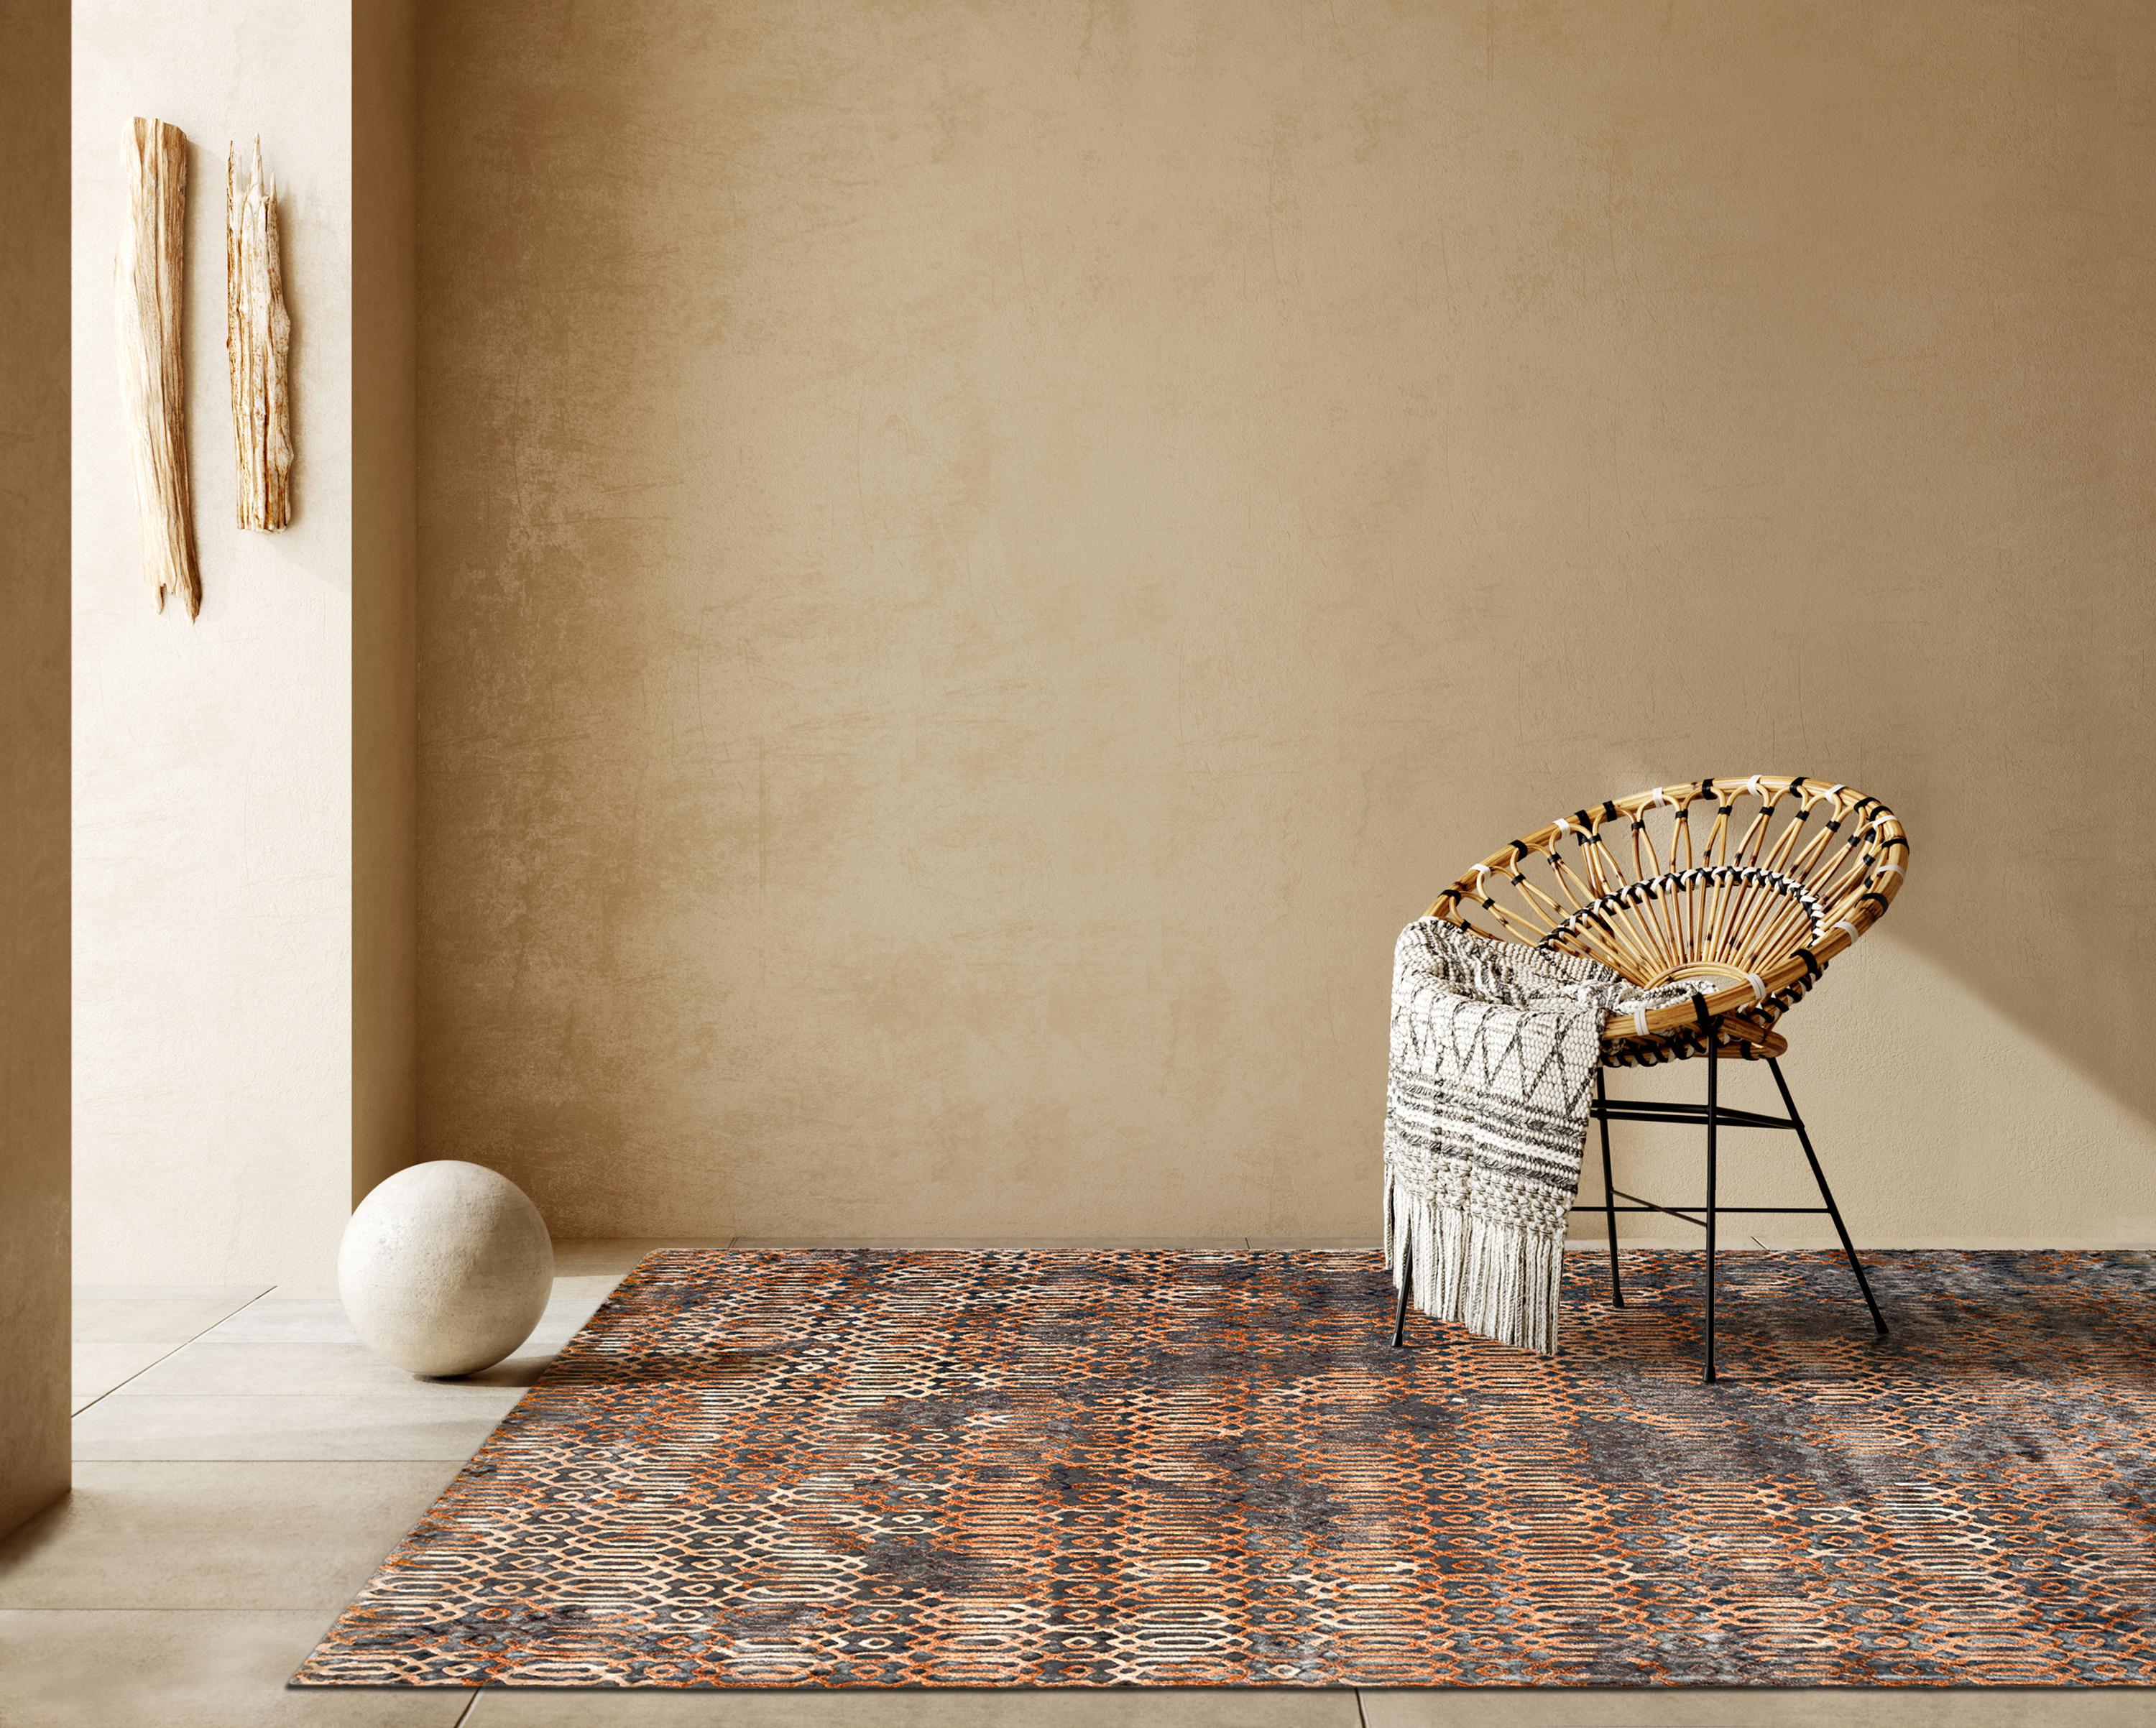 The ‘Lithology’ collection showcases stunning motifs that are evocative of the diverse and awe-inspiring natural surfaces of the earth. The carpets exhibit an artistic interpretation of Mother Nature in all its glory. The awe-inspiring range